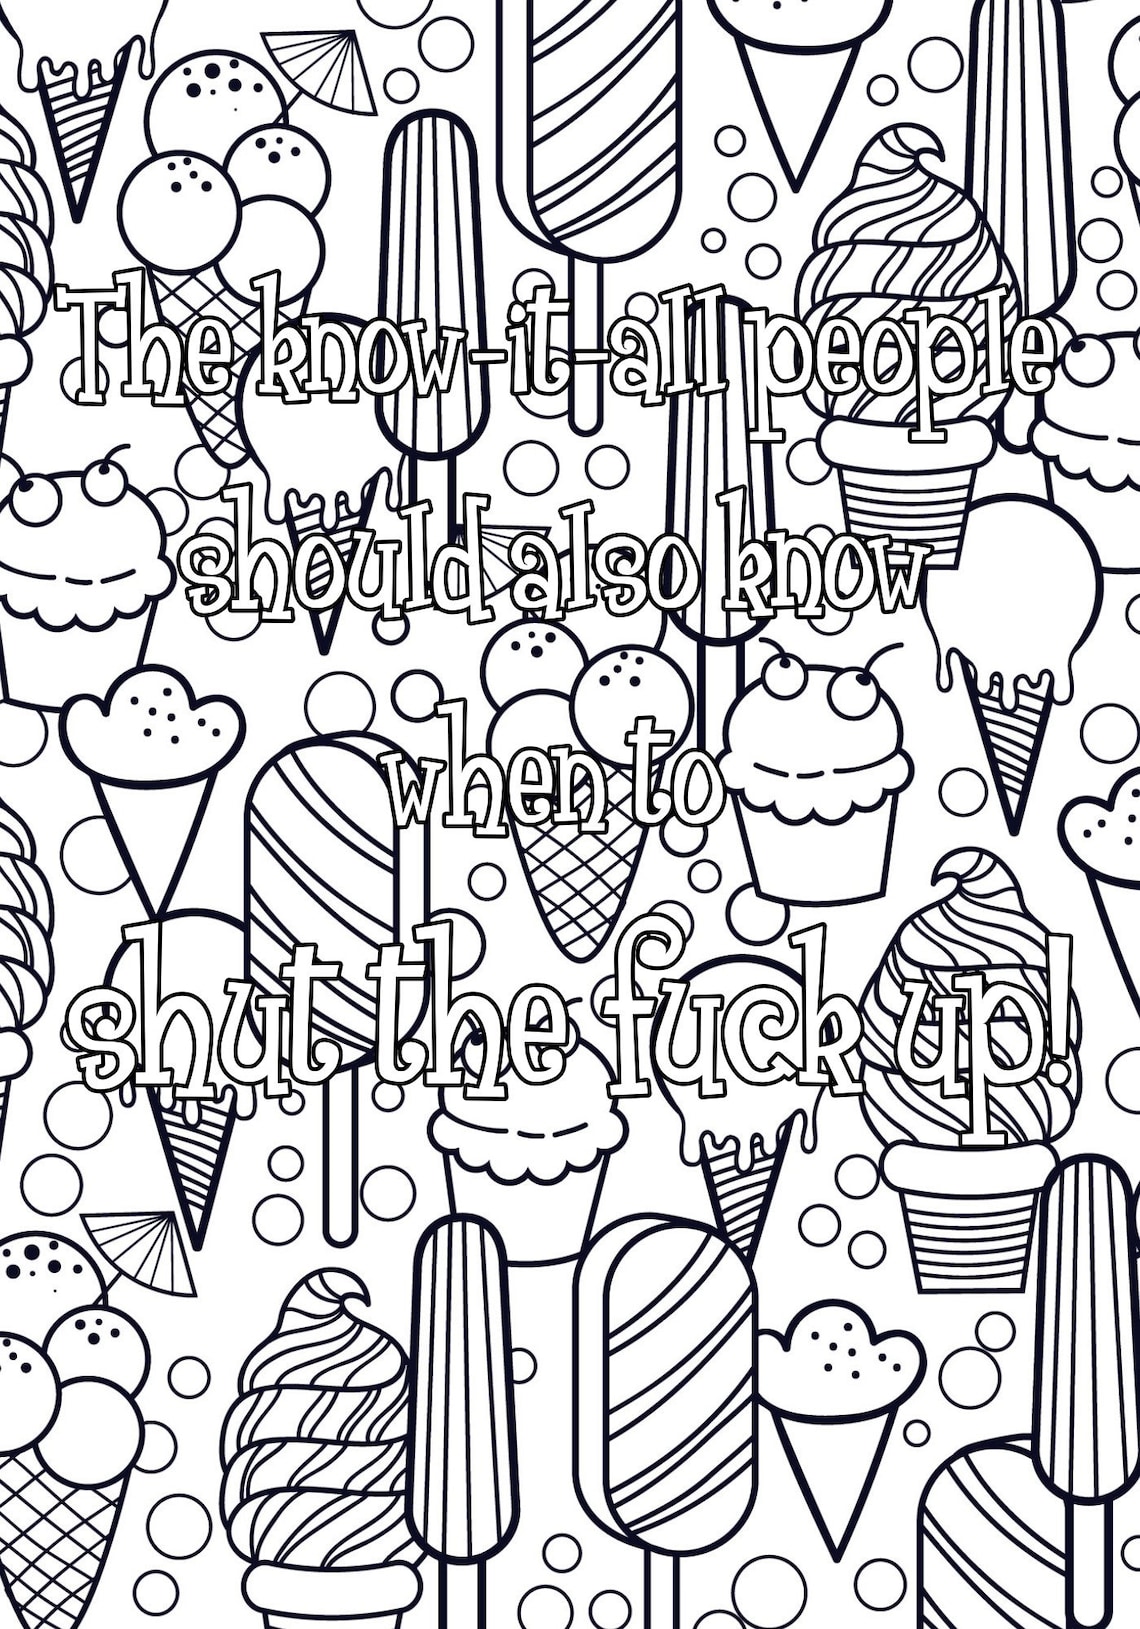 Sarcastic Adult Coloring Pages Printable Coloring Sheets - Etsy Australia